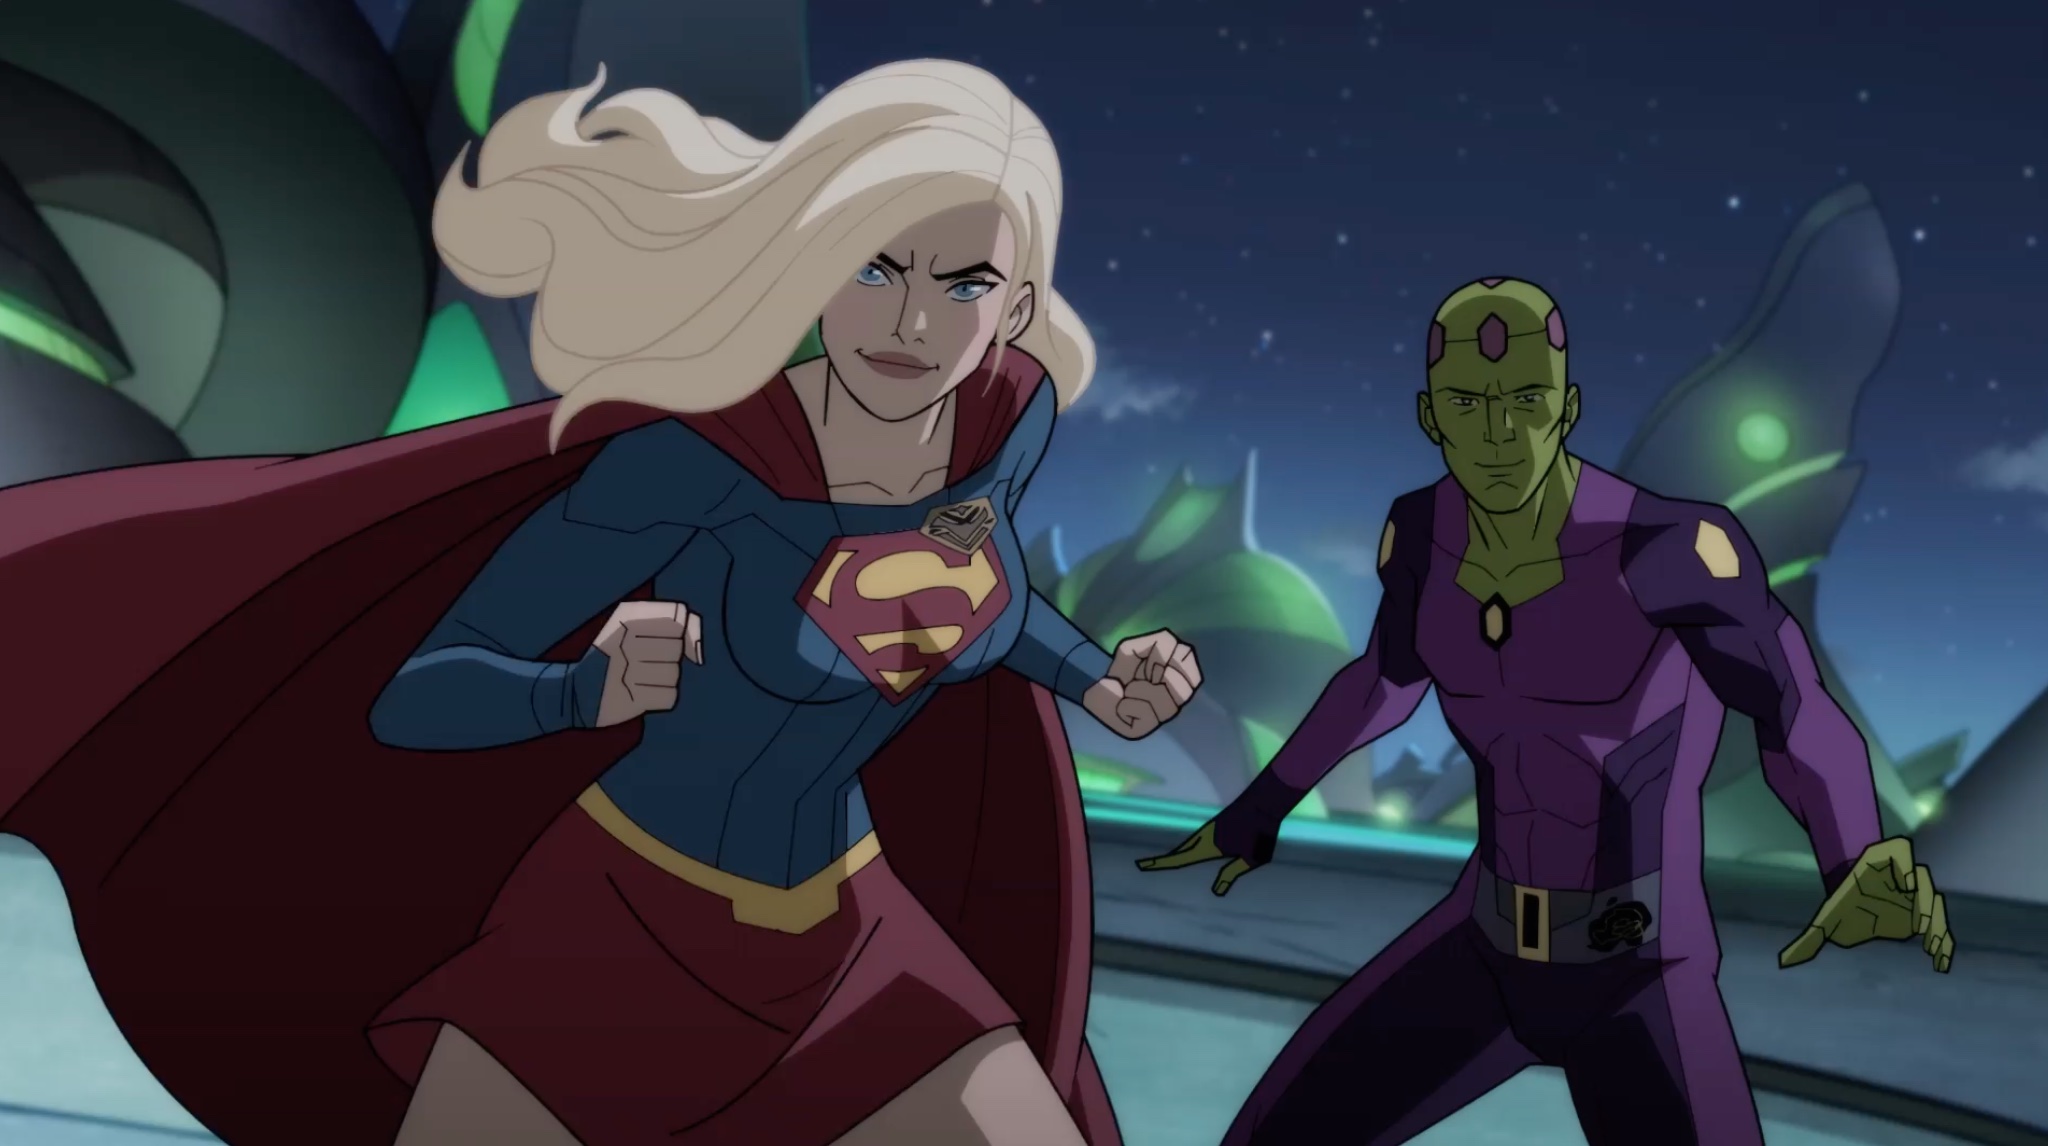 New Images from Legion of Super-Heroes Featuring Supergirl and Brainiac 5